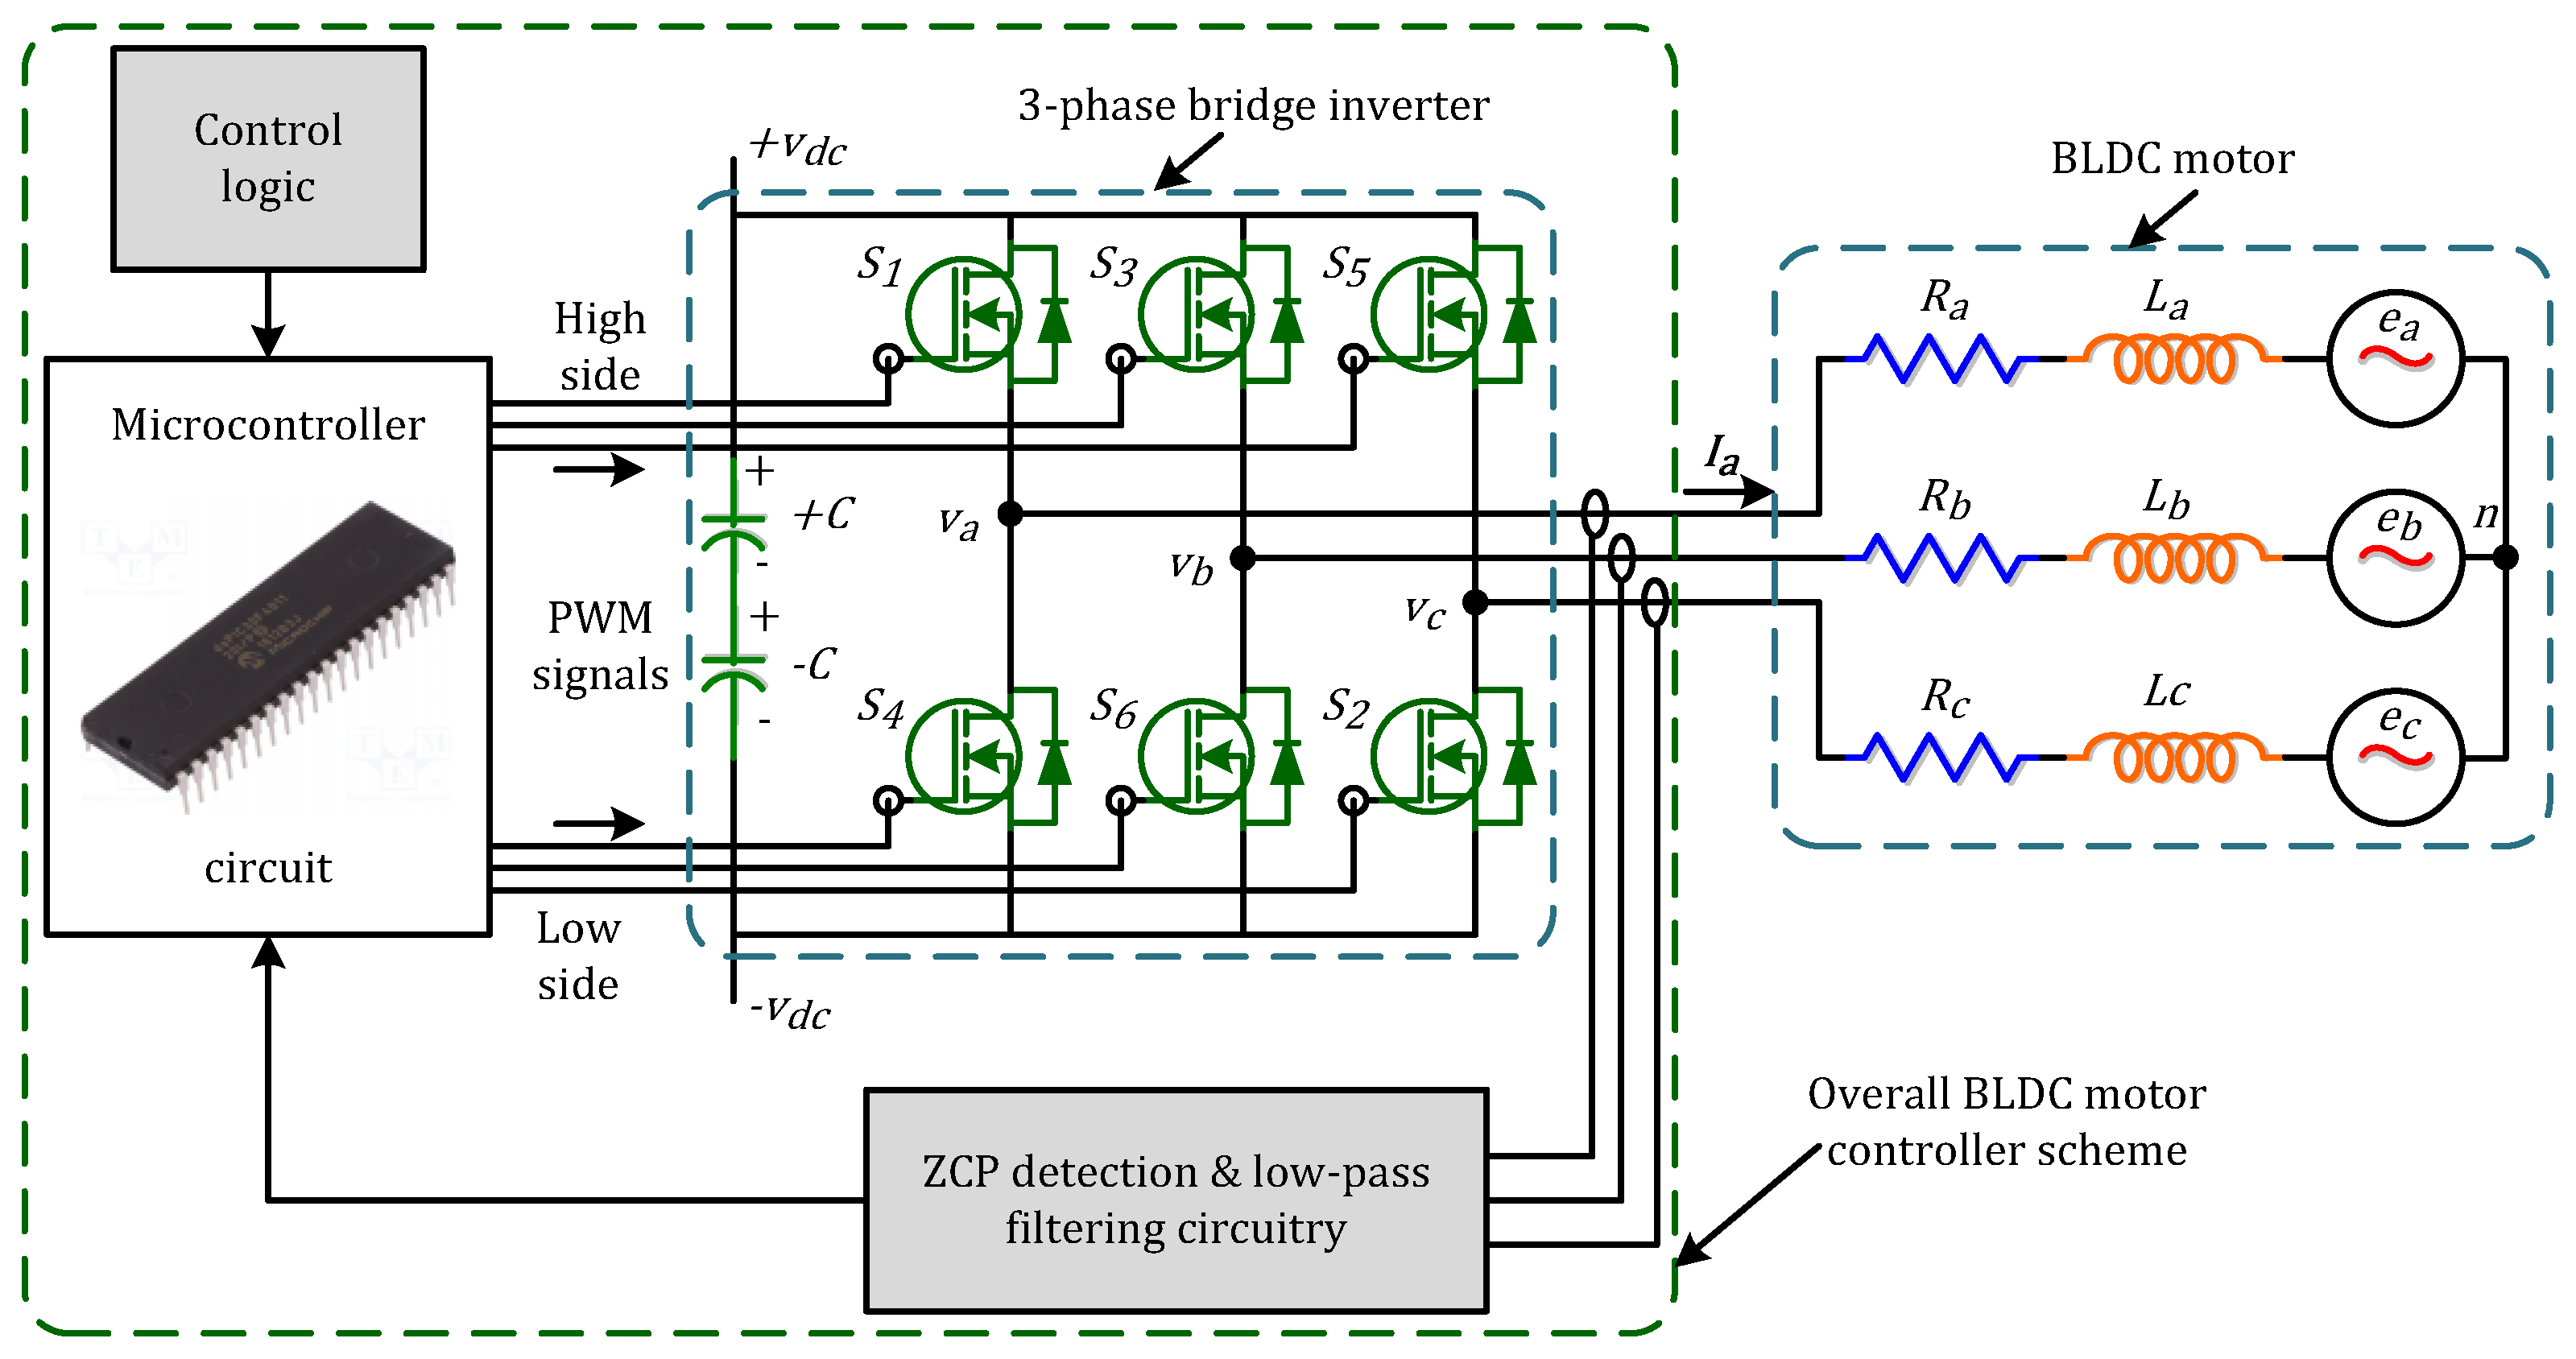 Electronics | Free Full-Text | Development and Implementation of a Low Cost  μC- Based Brushless DC Motor Sensorless Controller: A Practical Analysis of  Hardware and Software Aspects